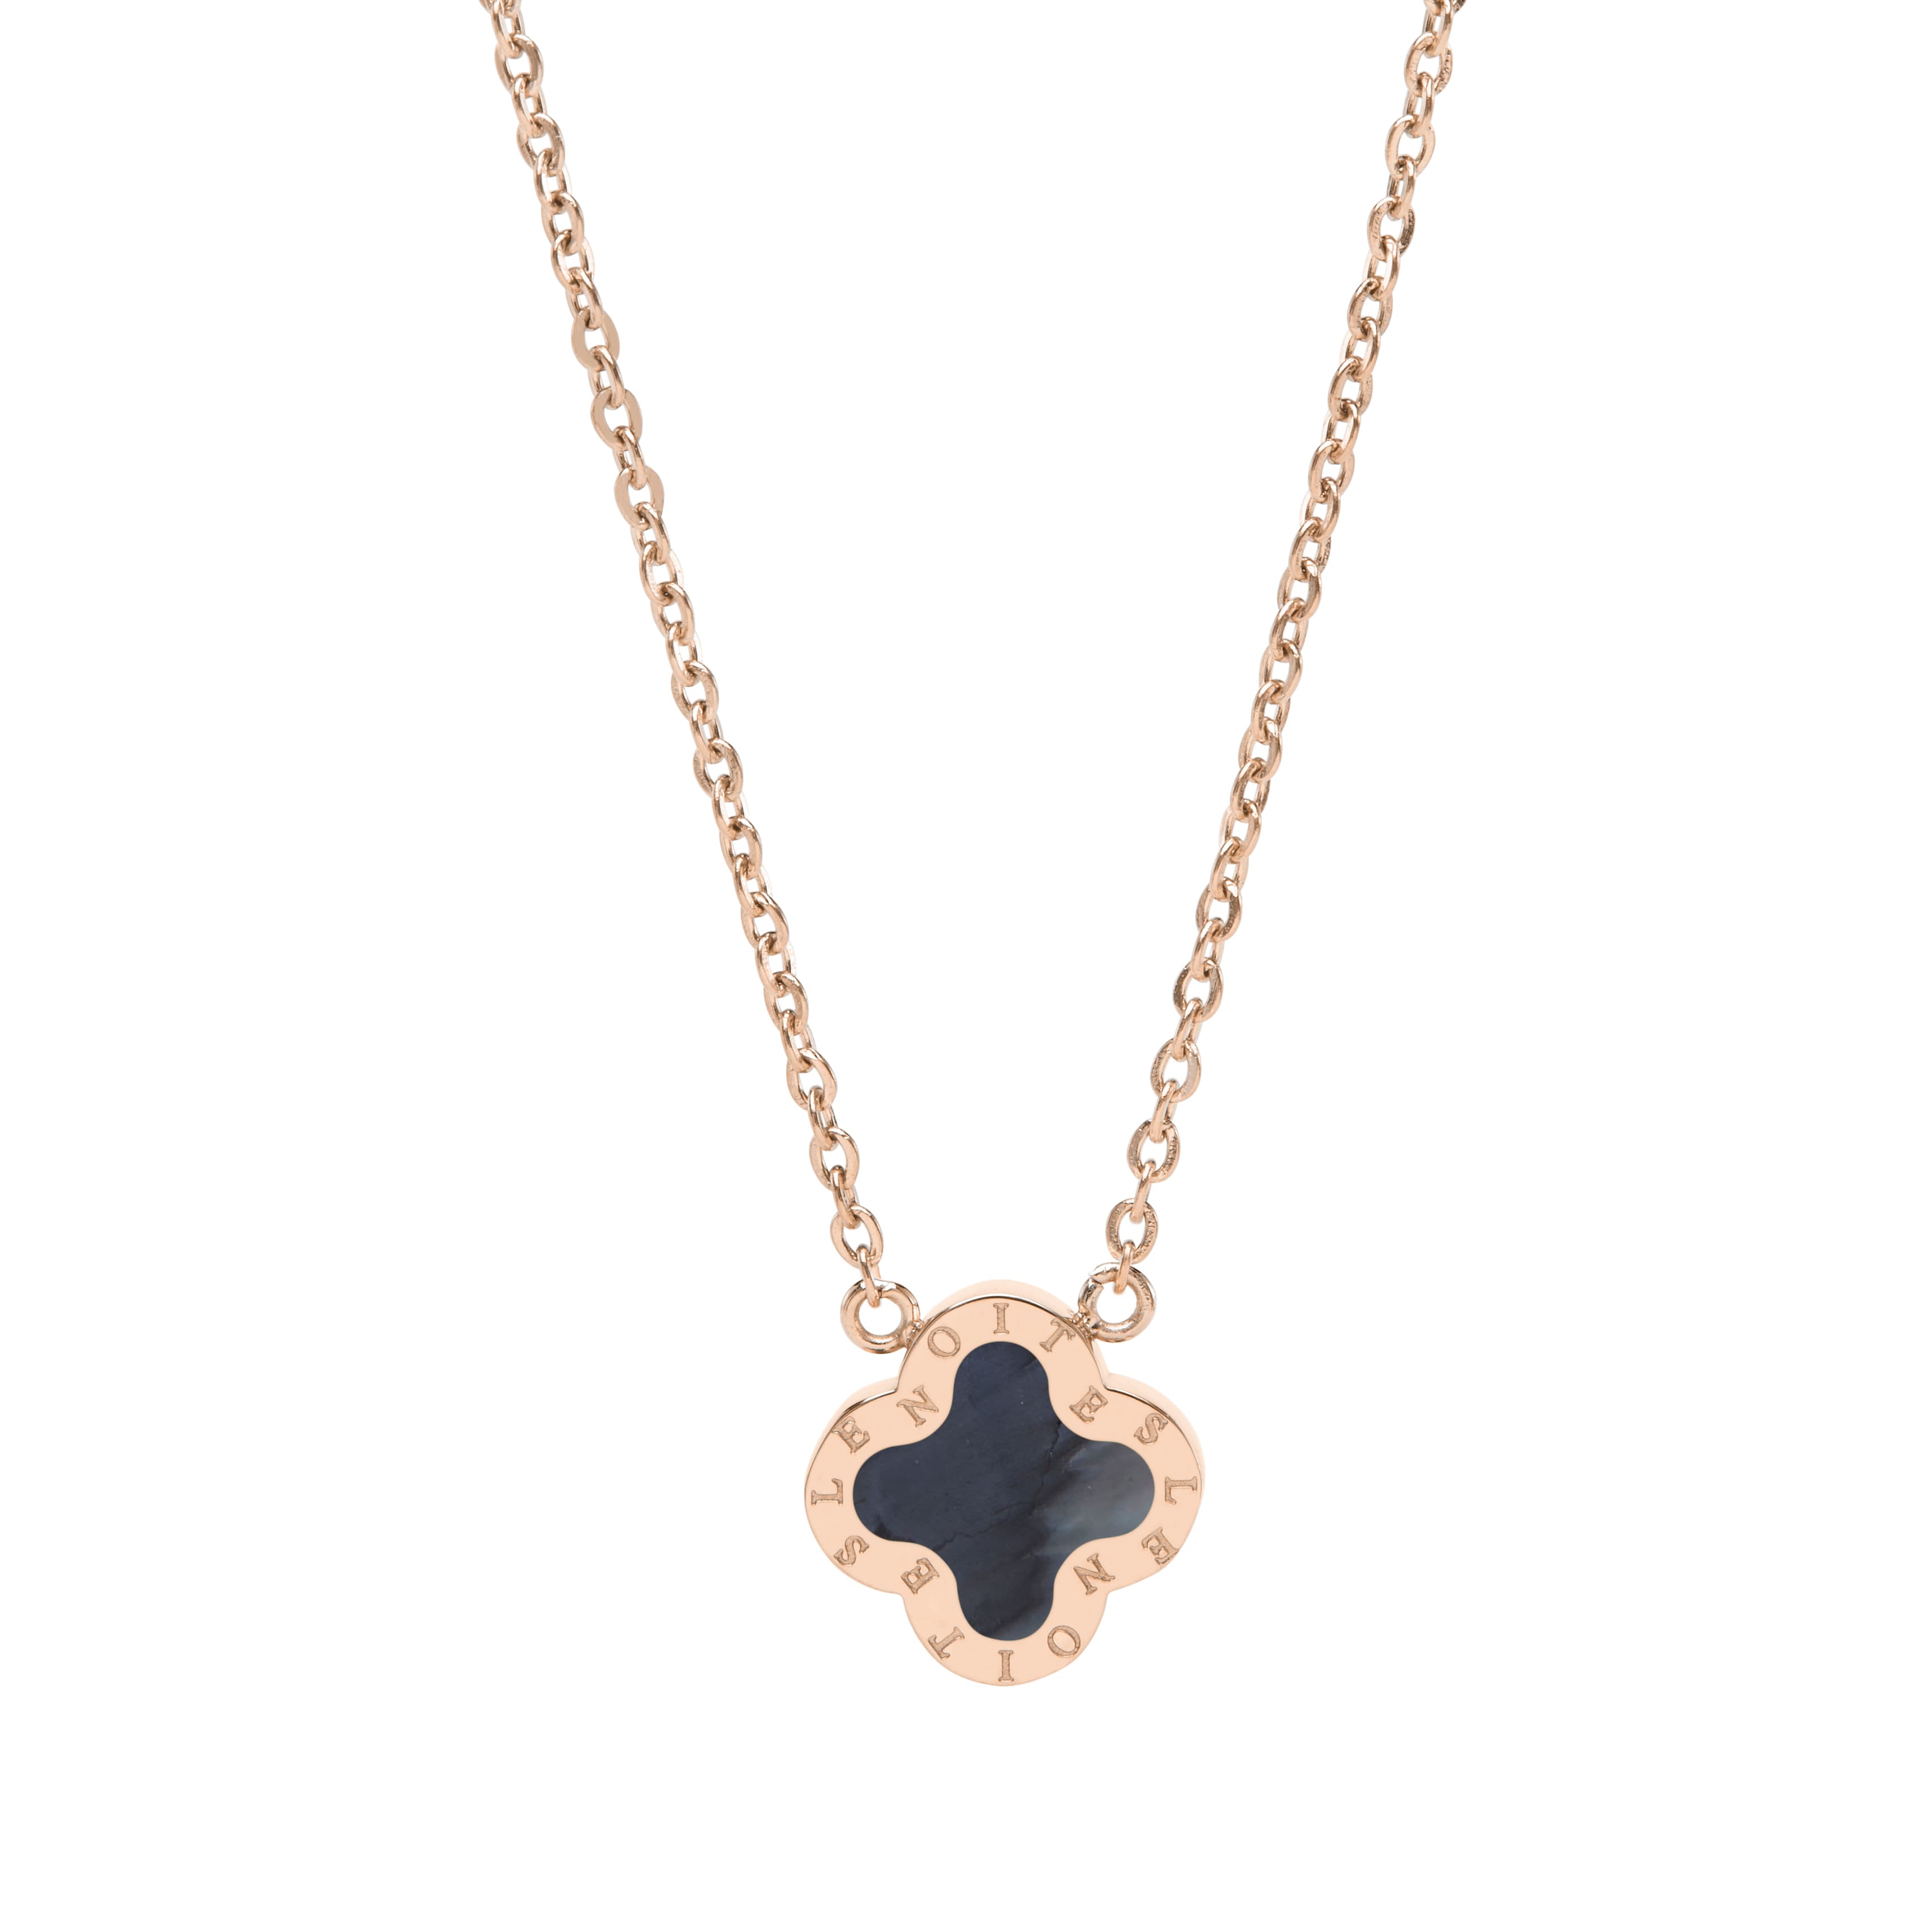 Four-Leaf Clover Necklace Mini, Rose Gold & Grey Mother of Pearl